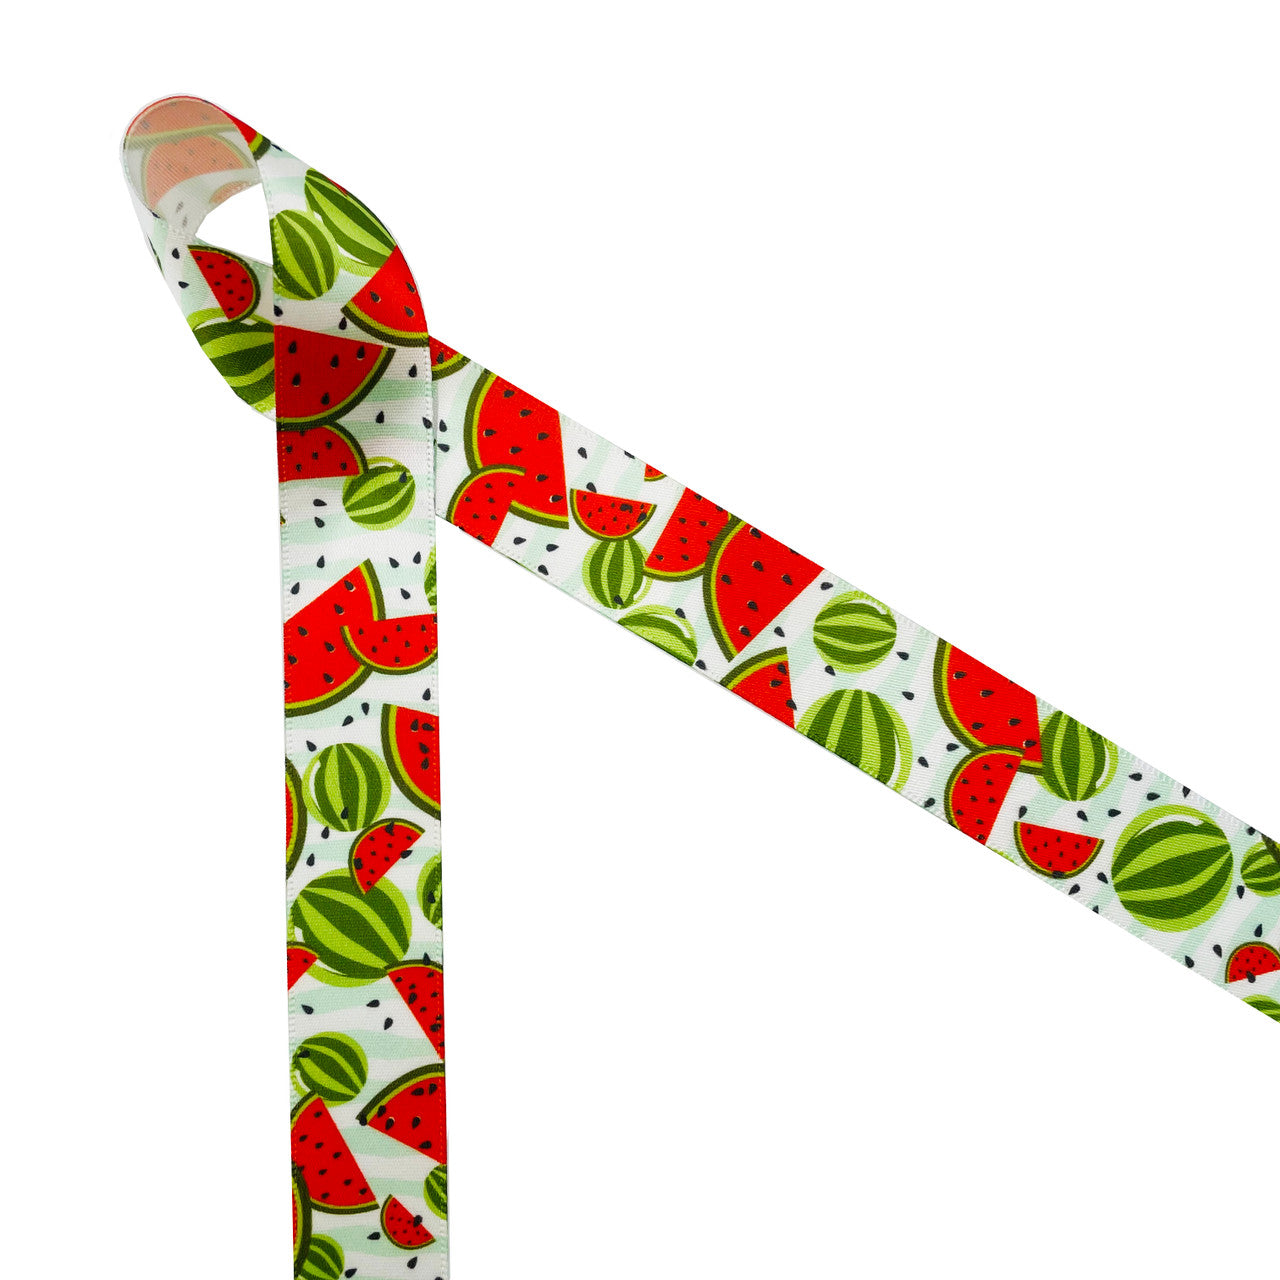 Watermelon ribbon red slices and whole melons with black seeds tossed on a green and white striped background printed on 7/8" white single face satin is a fun Summer themed ribbon. This is a great ribbon for barbecues, Summer parties, pool parties, and Fourth of July for party decor, party favors, gift wrap, gift baskets, cookies, cake pops and sweets tables! Use this ribbons for crafts, hair bows, headbands, sewing and quilting projects! All our ribbon is designed and printed in the USA